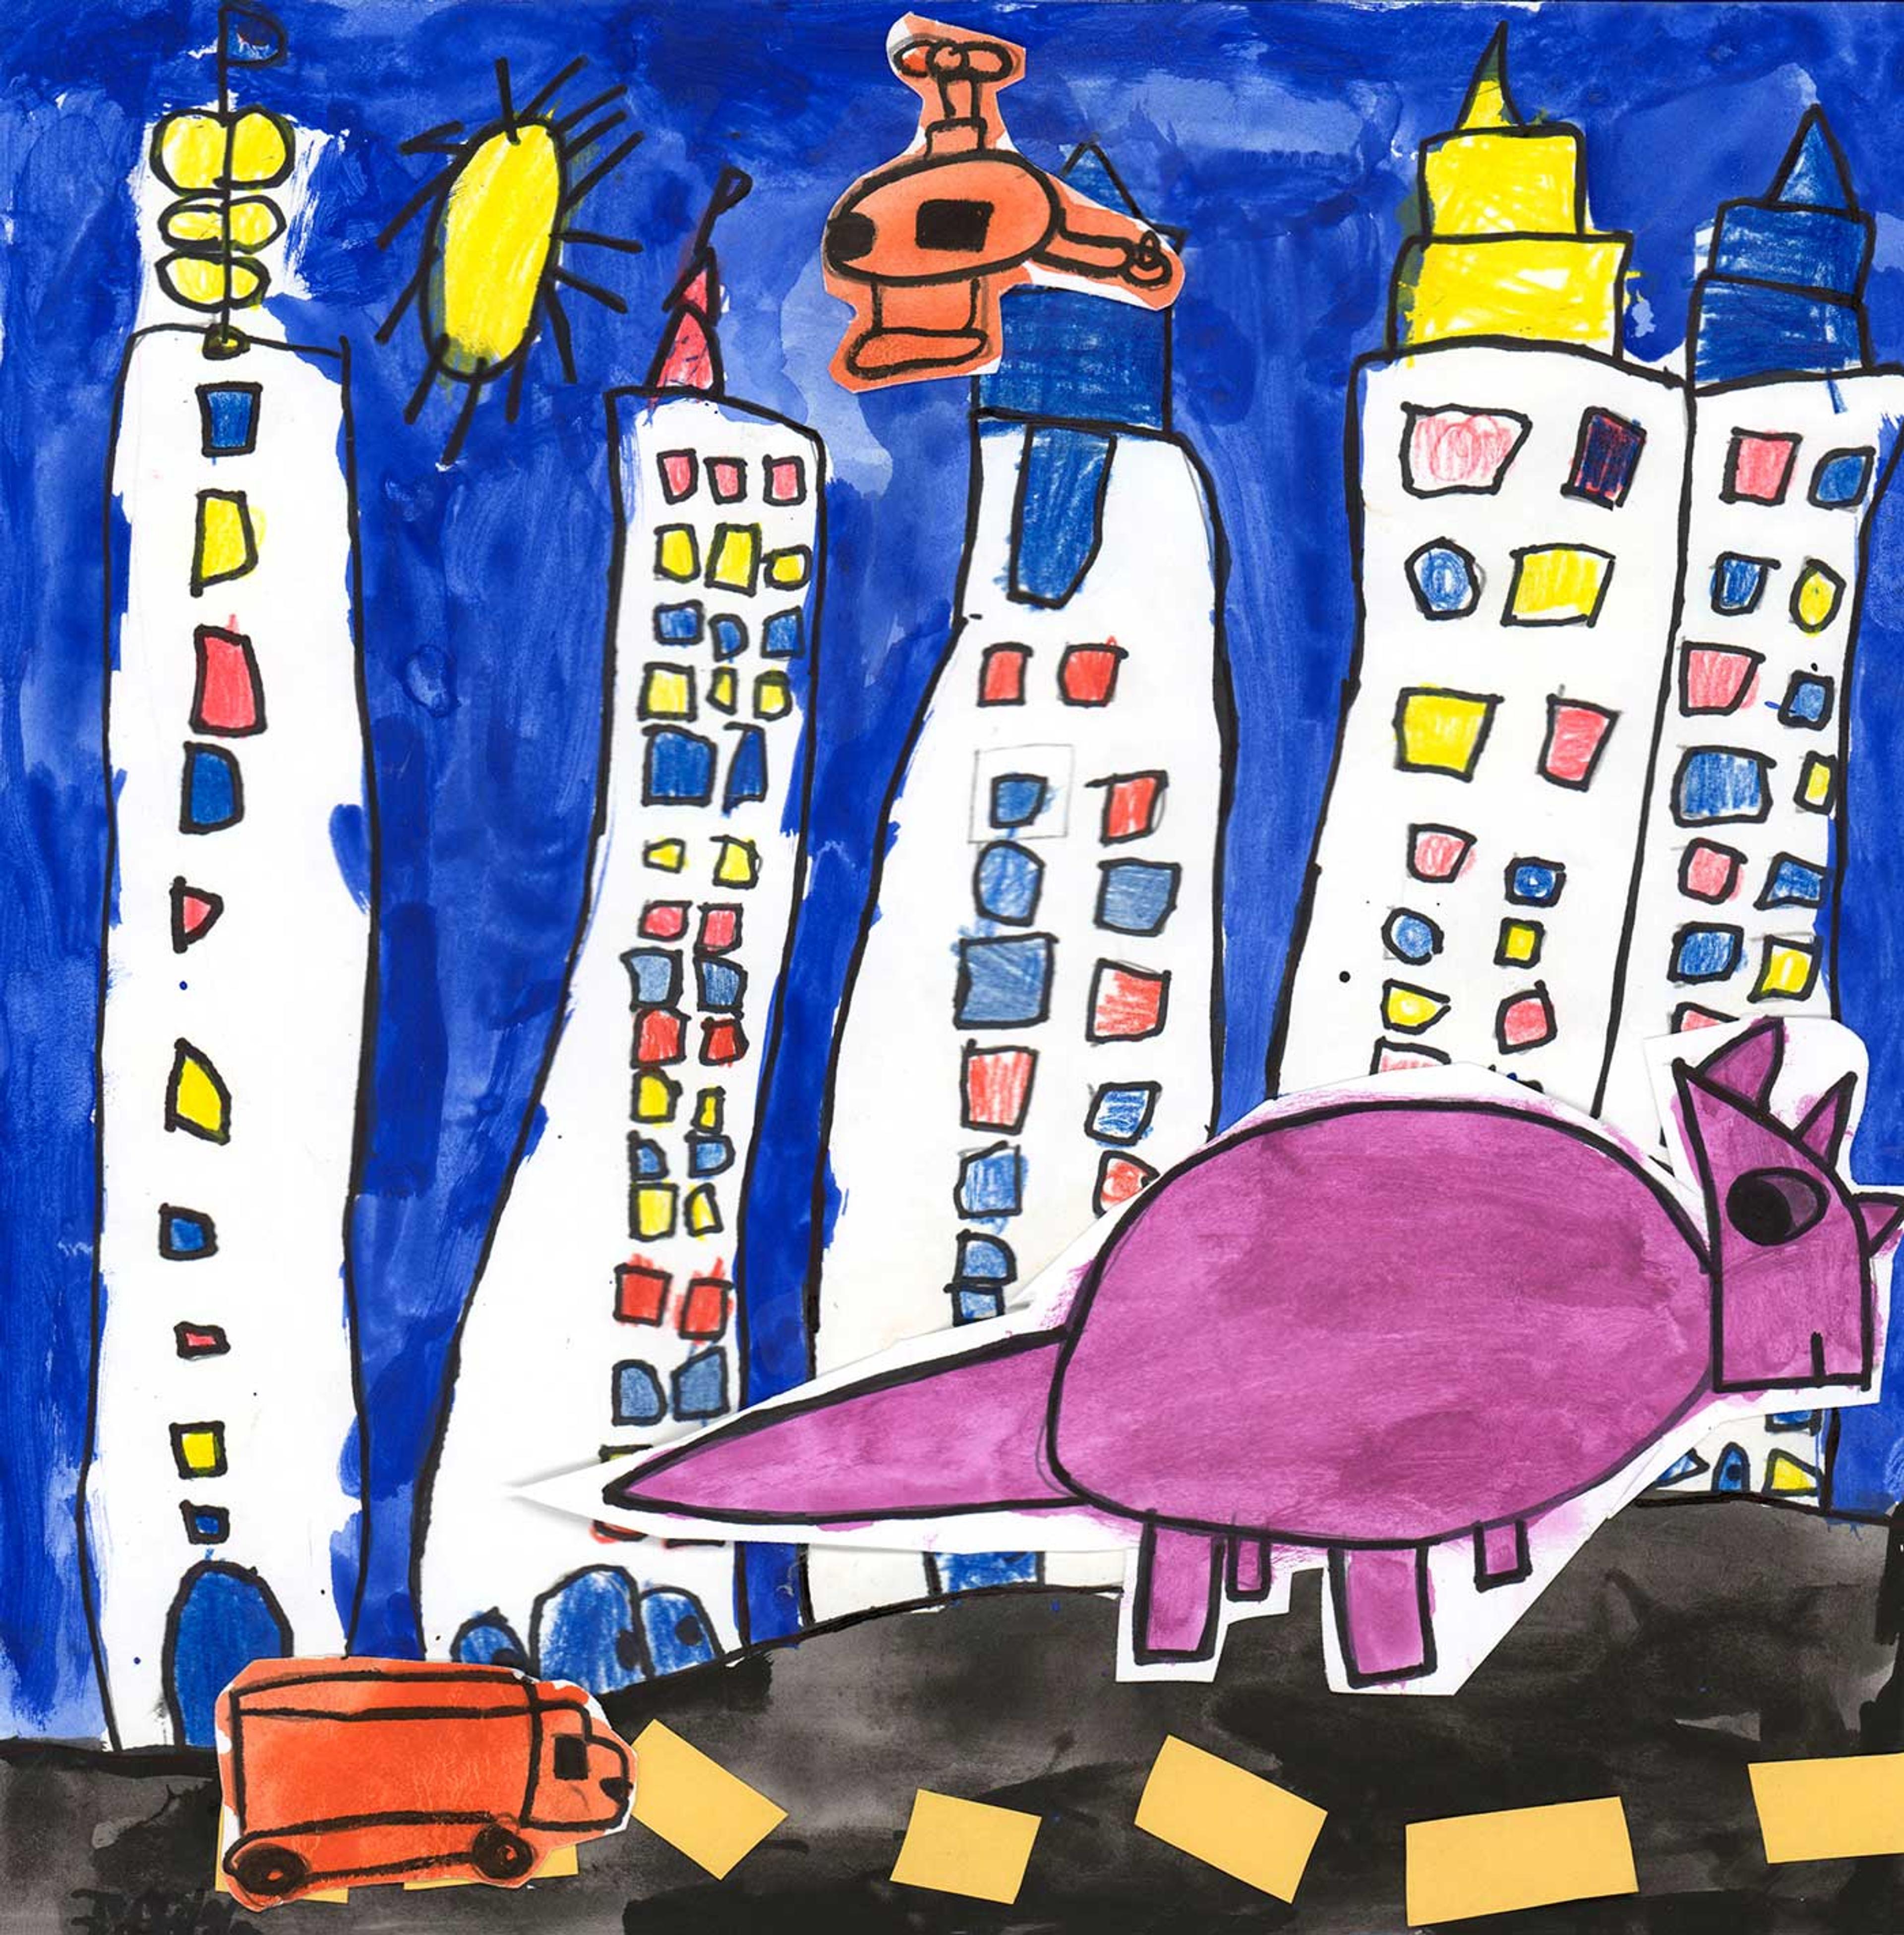 A pink colored dinosaur stands on a black road, in front of four skyscrapers. There is an orange helicopter in the sky.